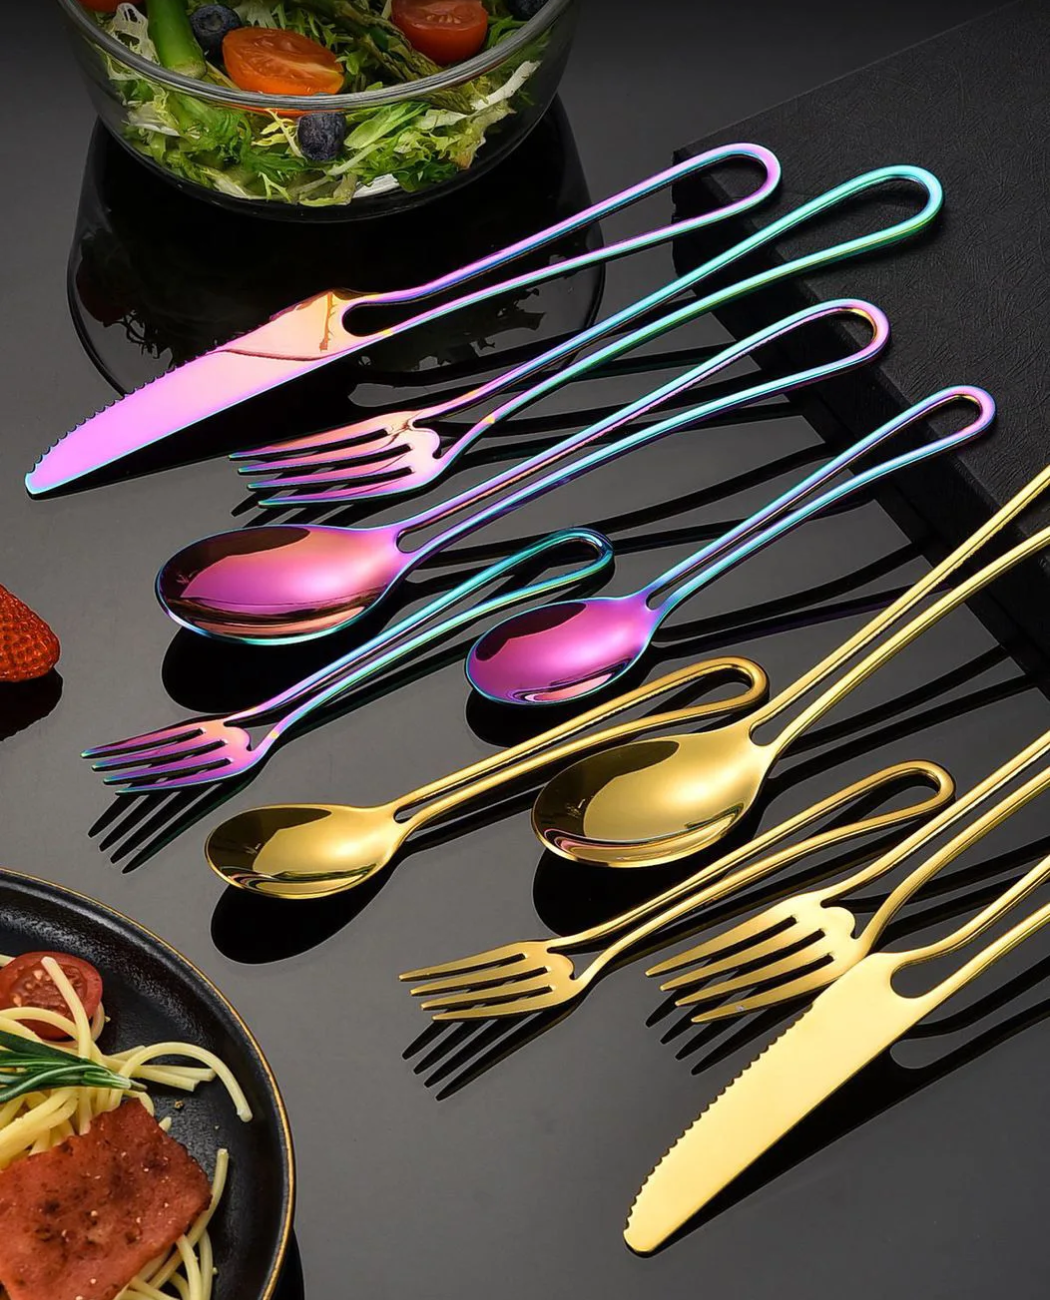 Delicious Food And Stylish Silverware With Cut Out Handles Minimalist Flatware In Iridescent And Gold Stainless Steel